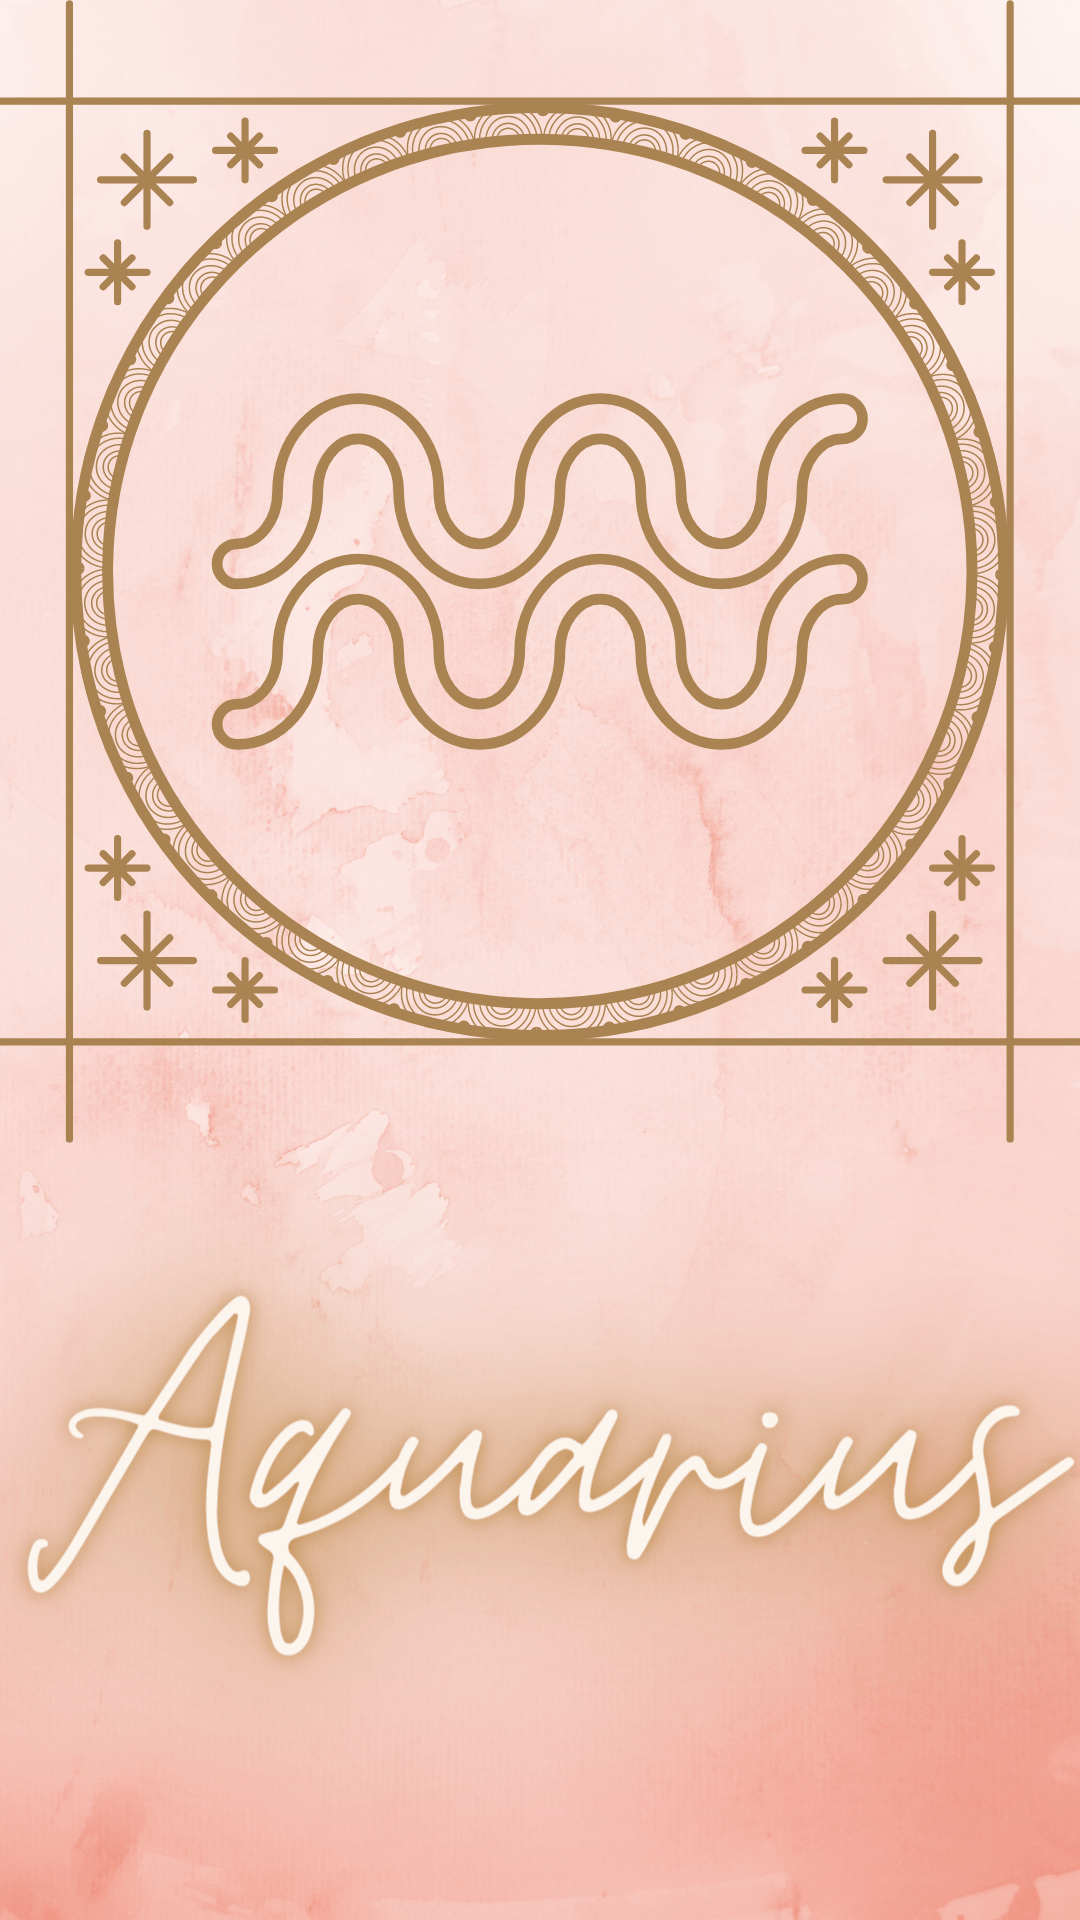 An image of the Aquarius zodiac sign on a pink background - Aquarius